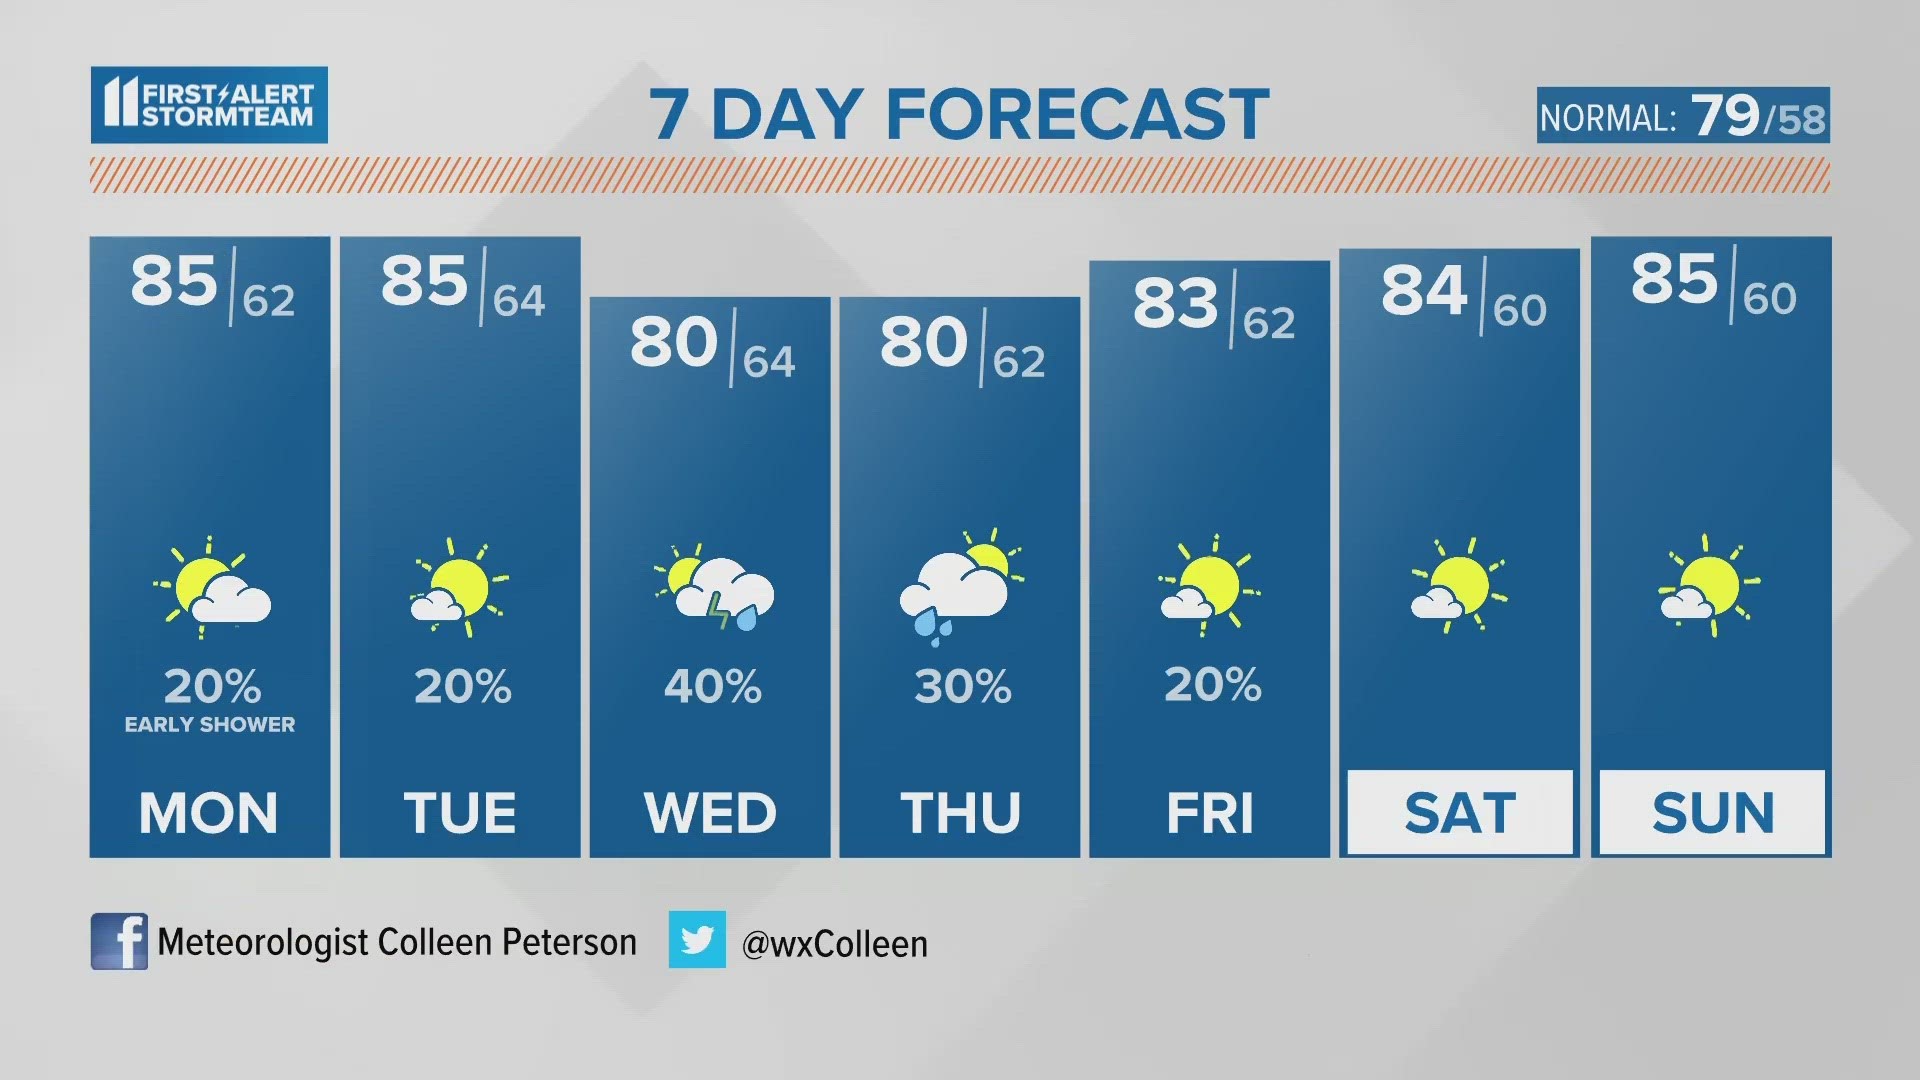 We are mostly dry to begin the new week. We are finally tracking rain chances by Wednesday.